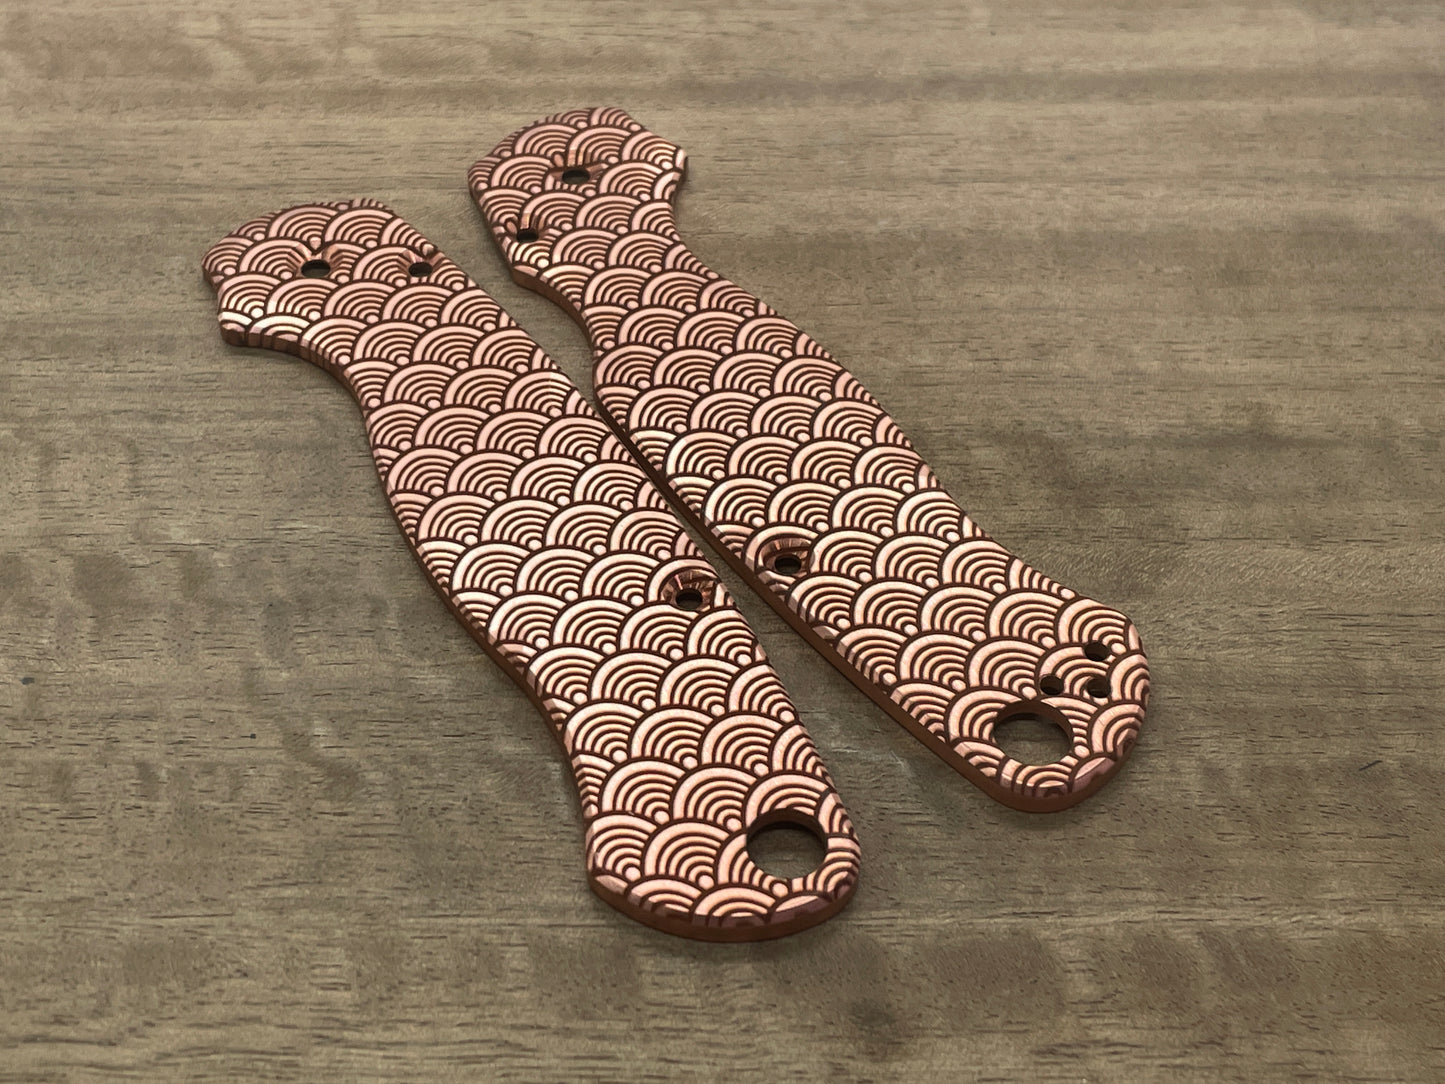 SEIGAIHA Copper scales for Spyderco Paramilitary 2 PM2